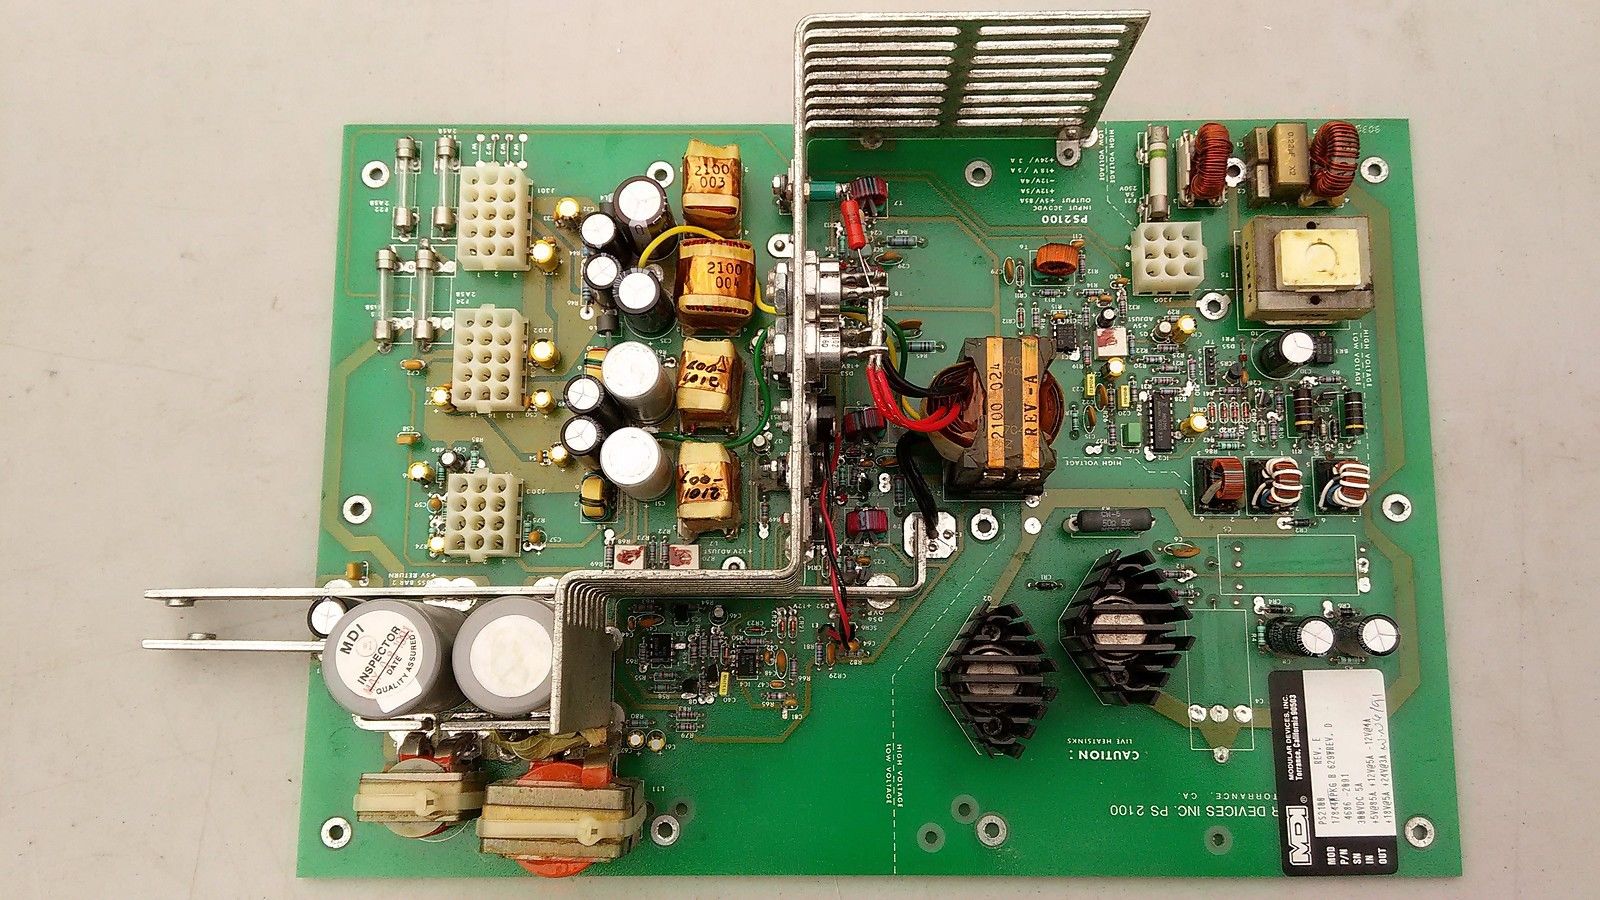 5TT80 ACUSON ULTRASOUND COMPONENTS: POWER SUPPLY BOARD MODULAR DEVICES PS2100 DIAGNOSTIC ULTRASOUND MACHINES FOR SALE